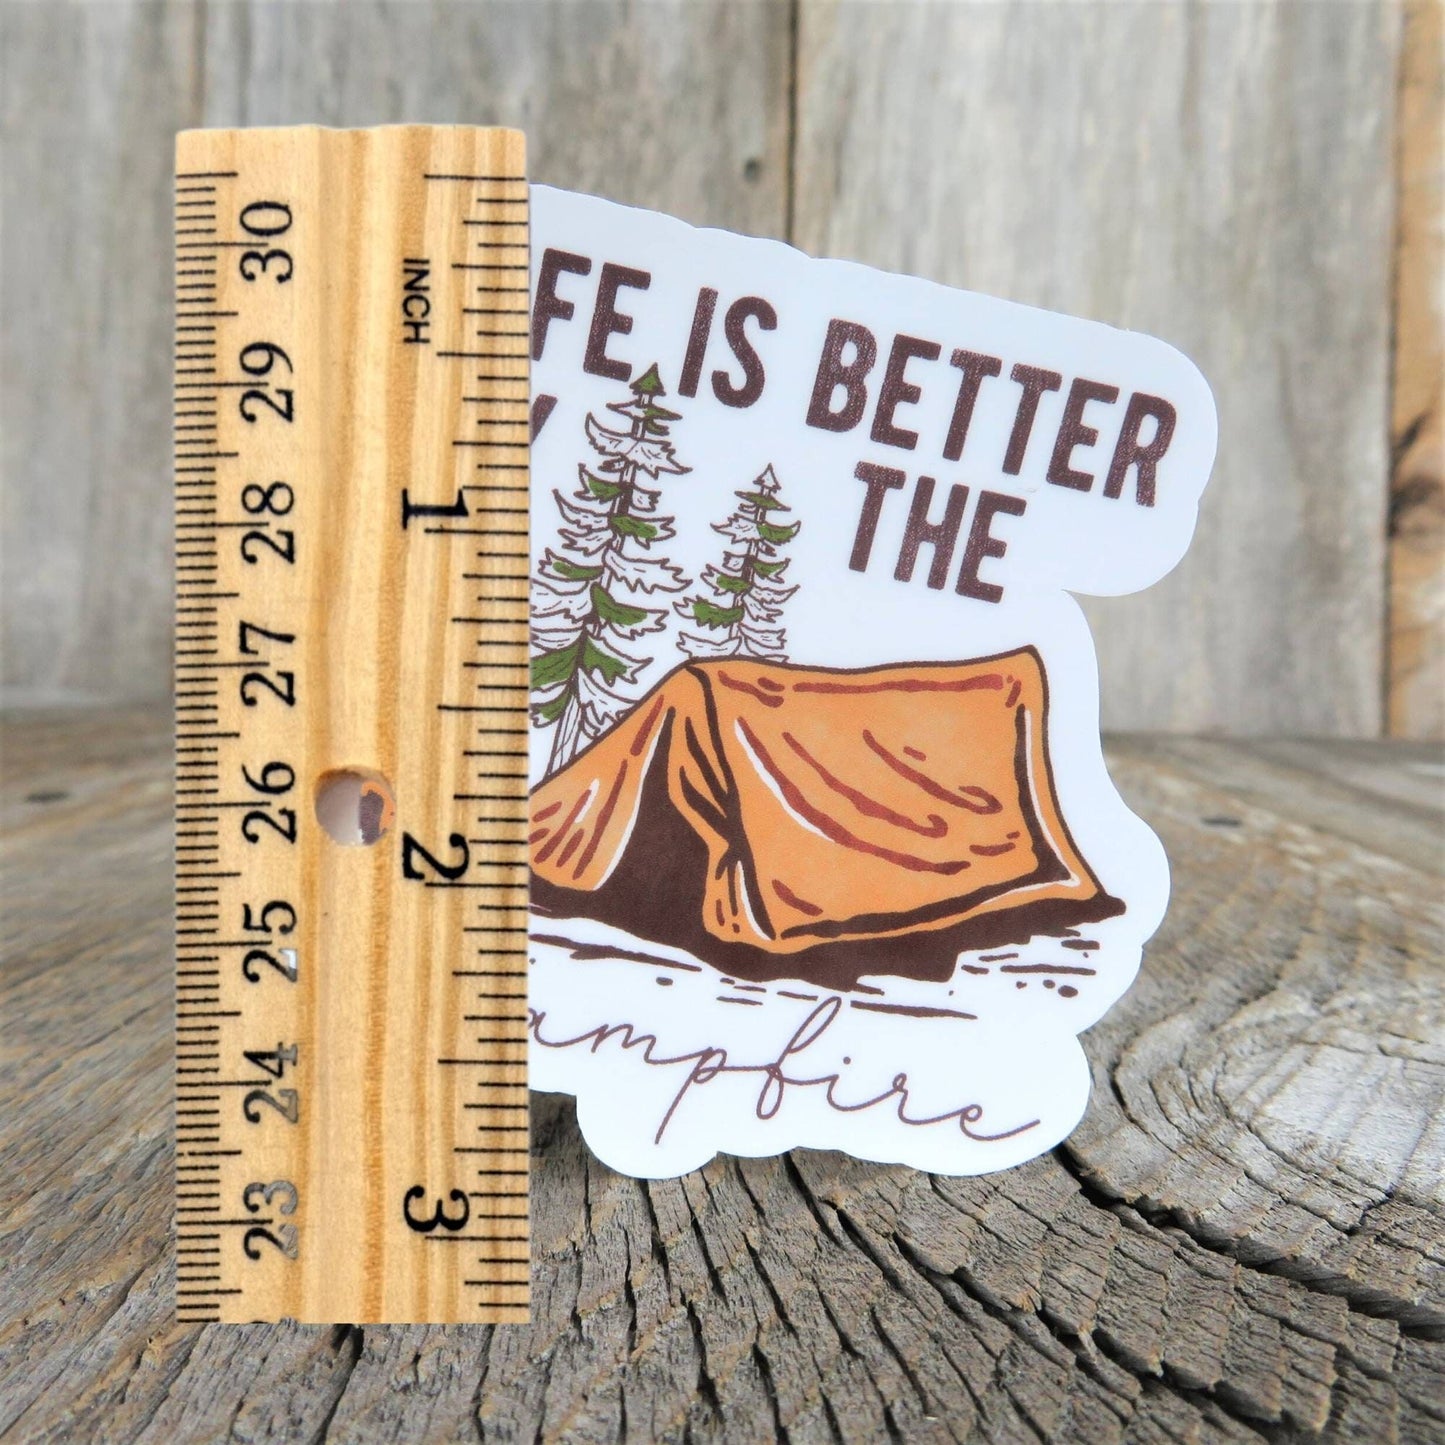 Life is Better By the Campfire Sticker Full Color Waterproof Outdoors Tent Camping Water Bottle Sticker